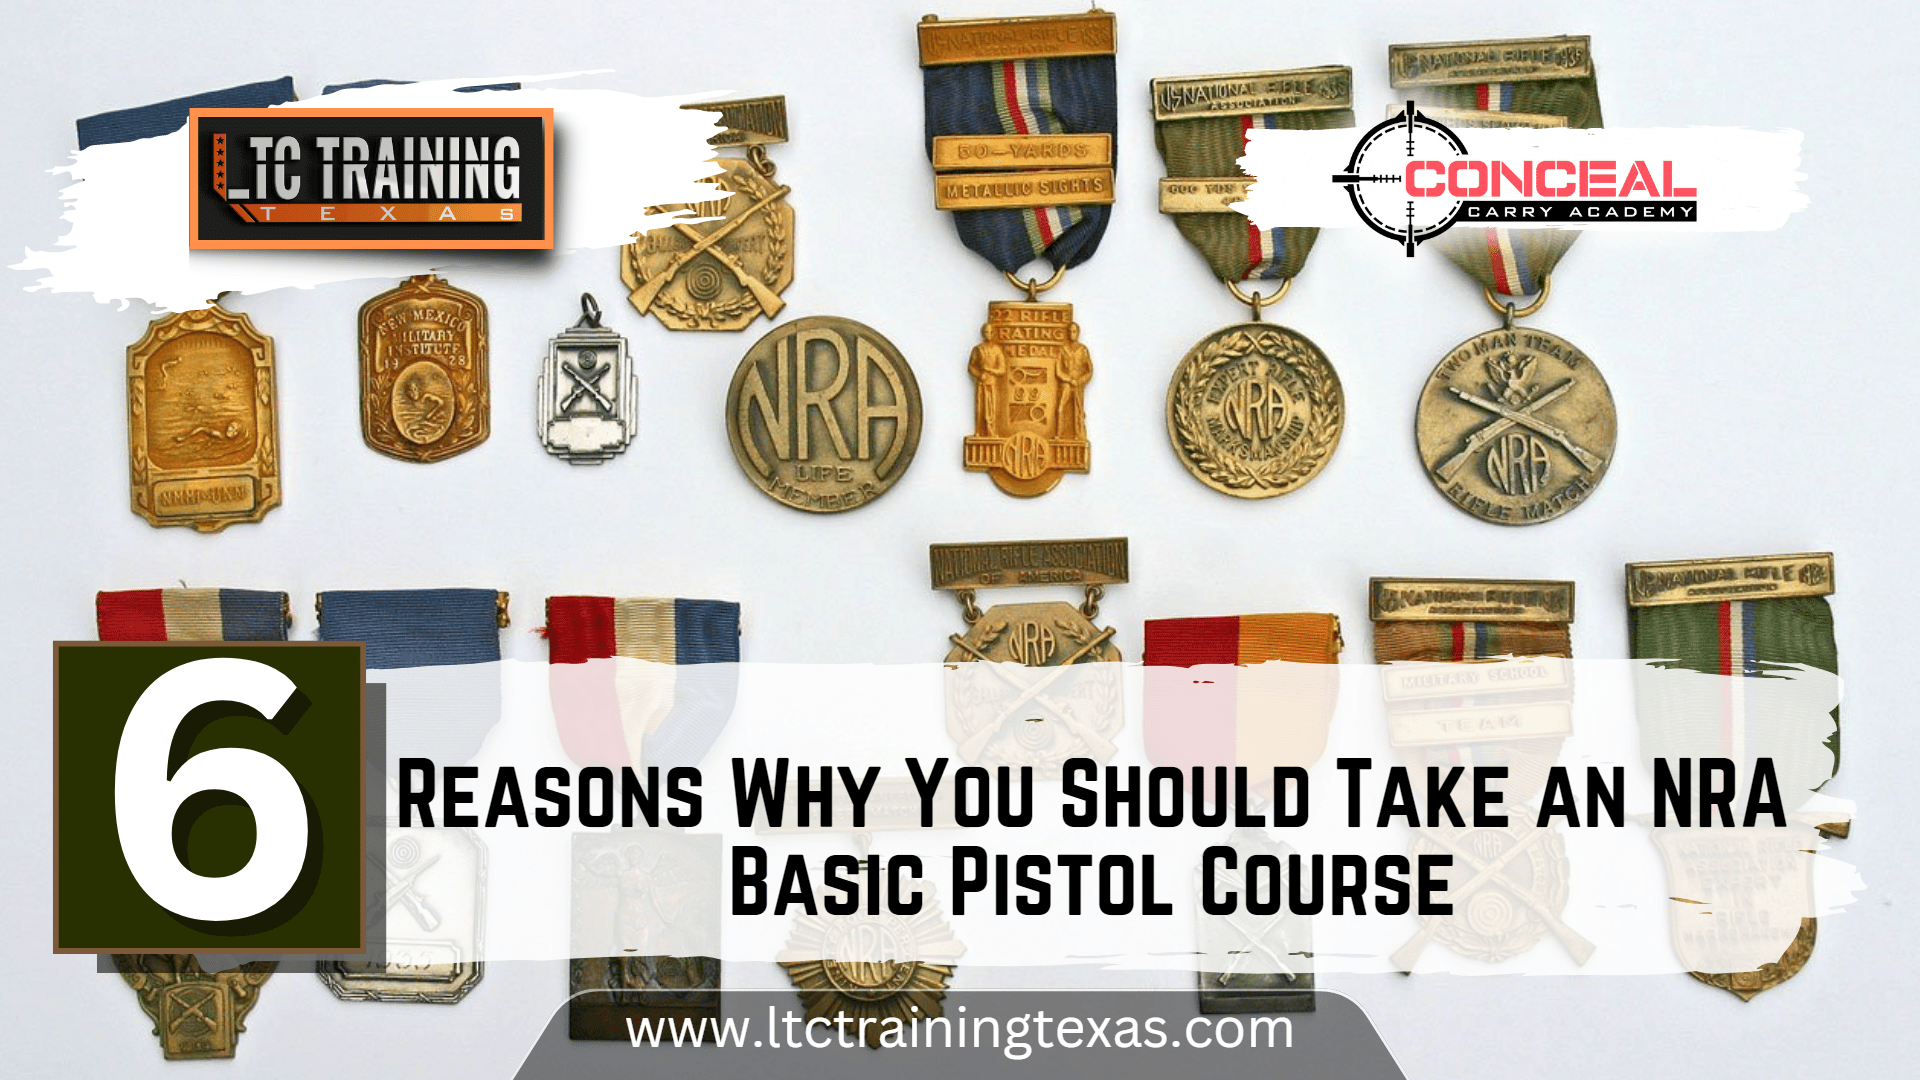 6 Reasons Why You Should Take an NRA Basic Pistol Course